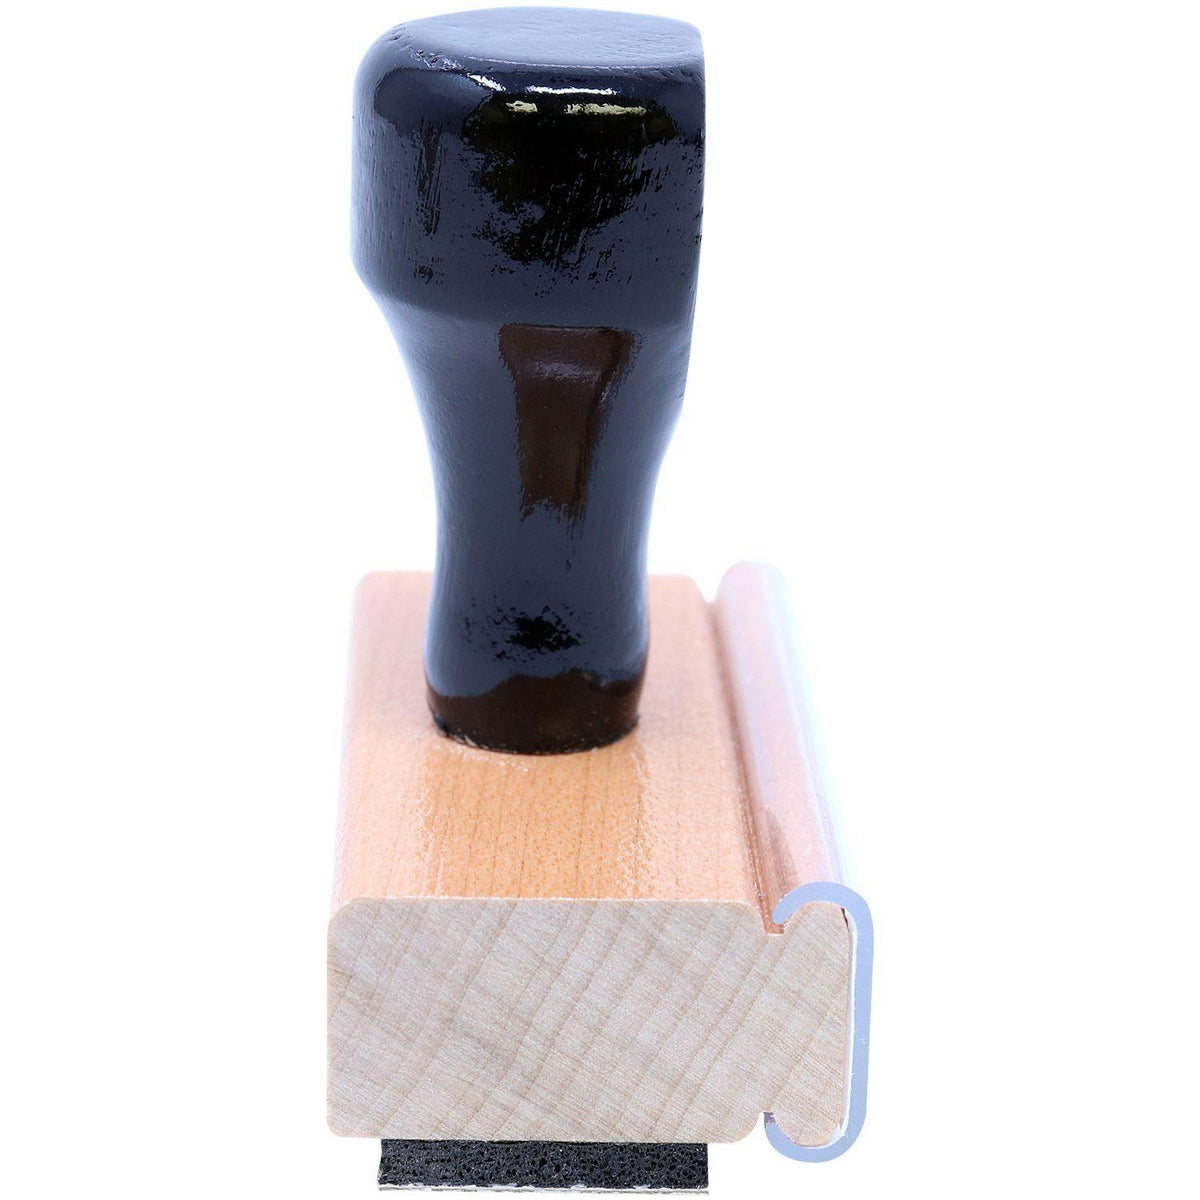 Large Void with Strikelines Rubber Stamp - Engineer Seal Stamps - Brand_Acorn, Impression Size_Large, Stamp Type_Regular Stamp, Type of Use_Office, Type of Use_Professional